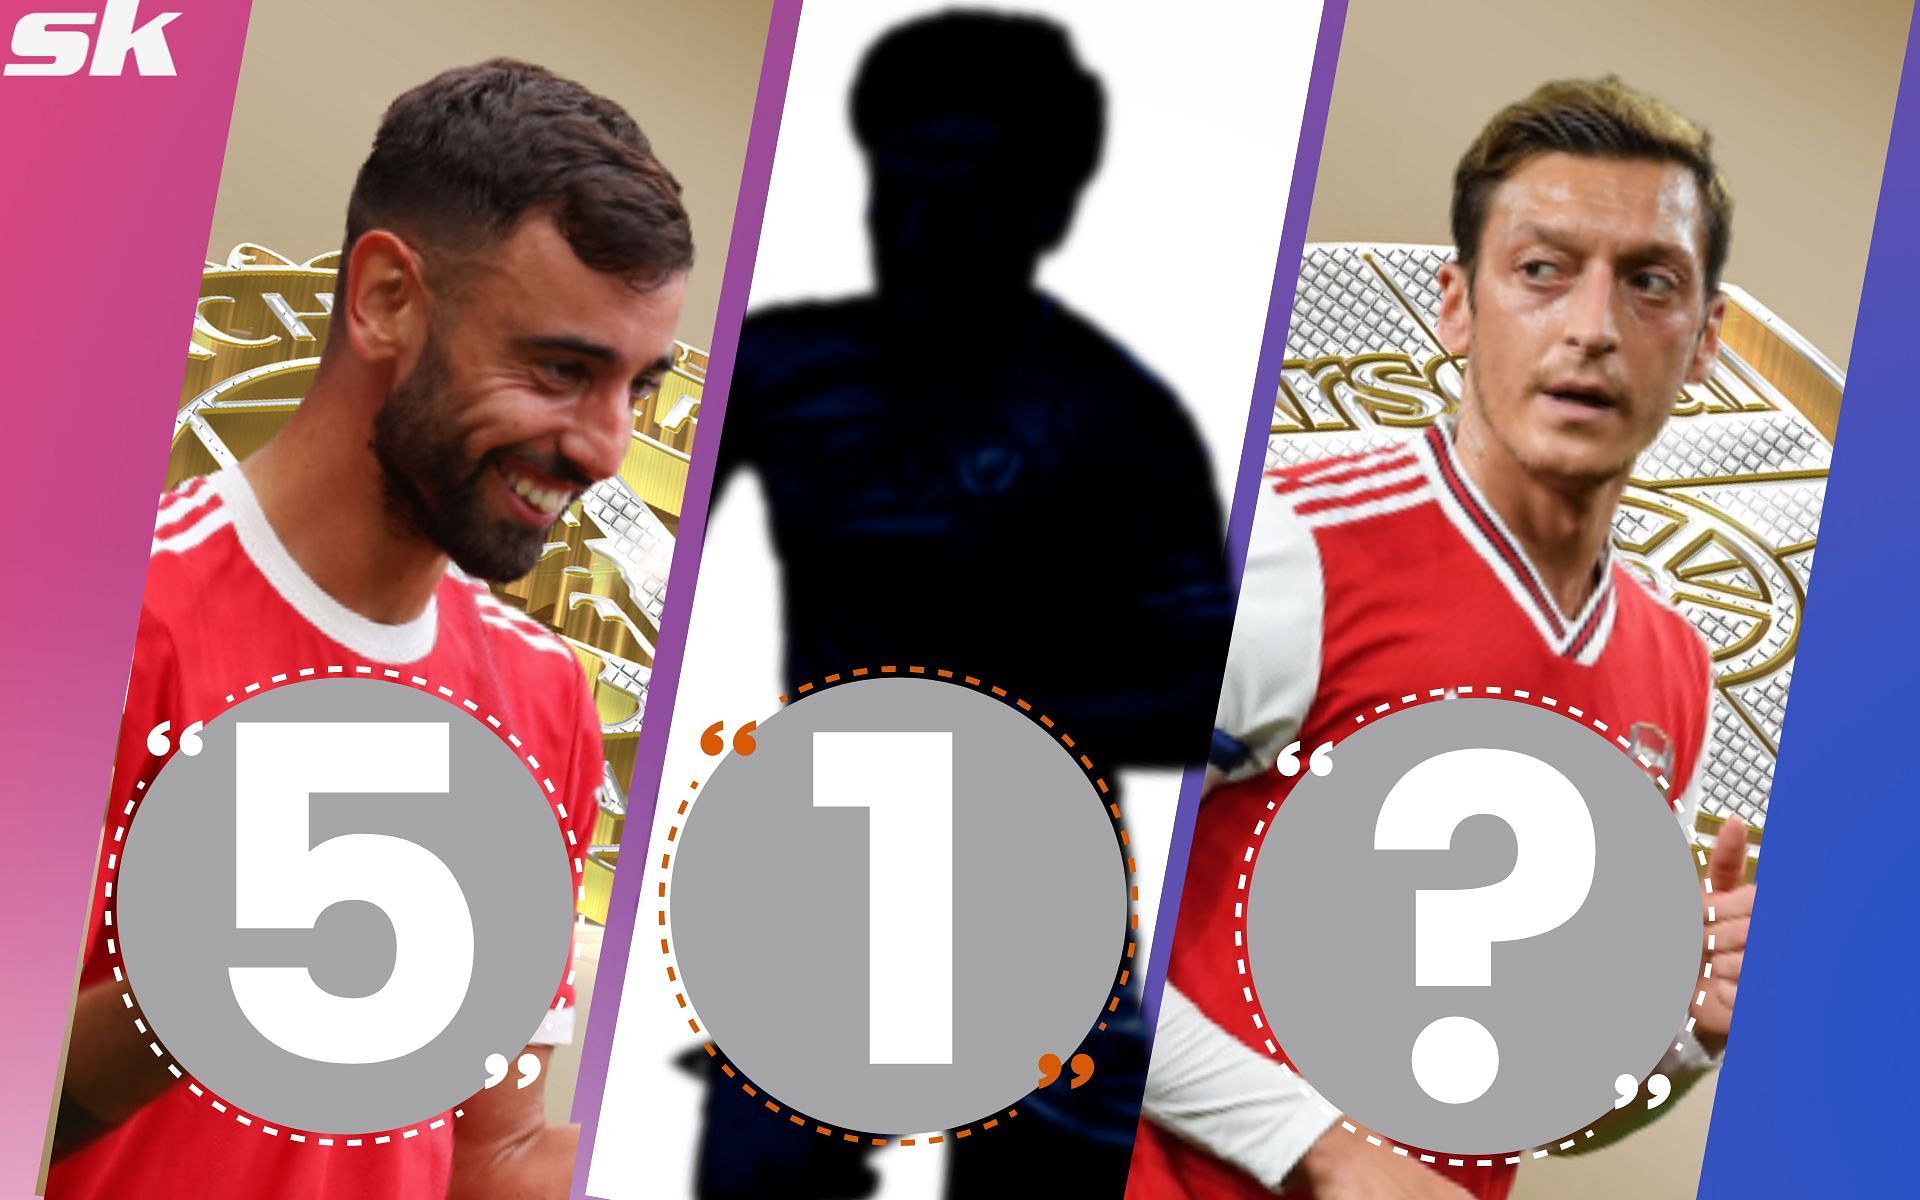 Who is the greatest CAM in Premier League history?